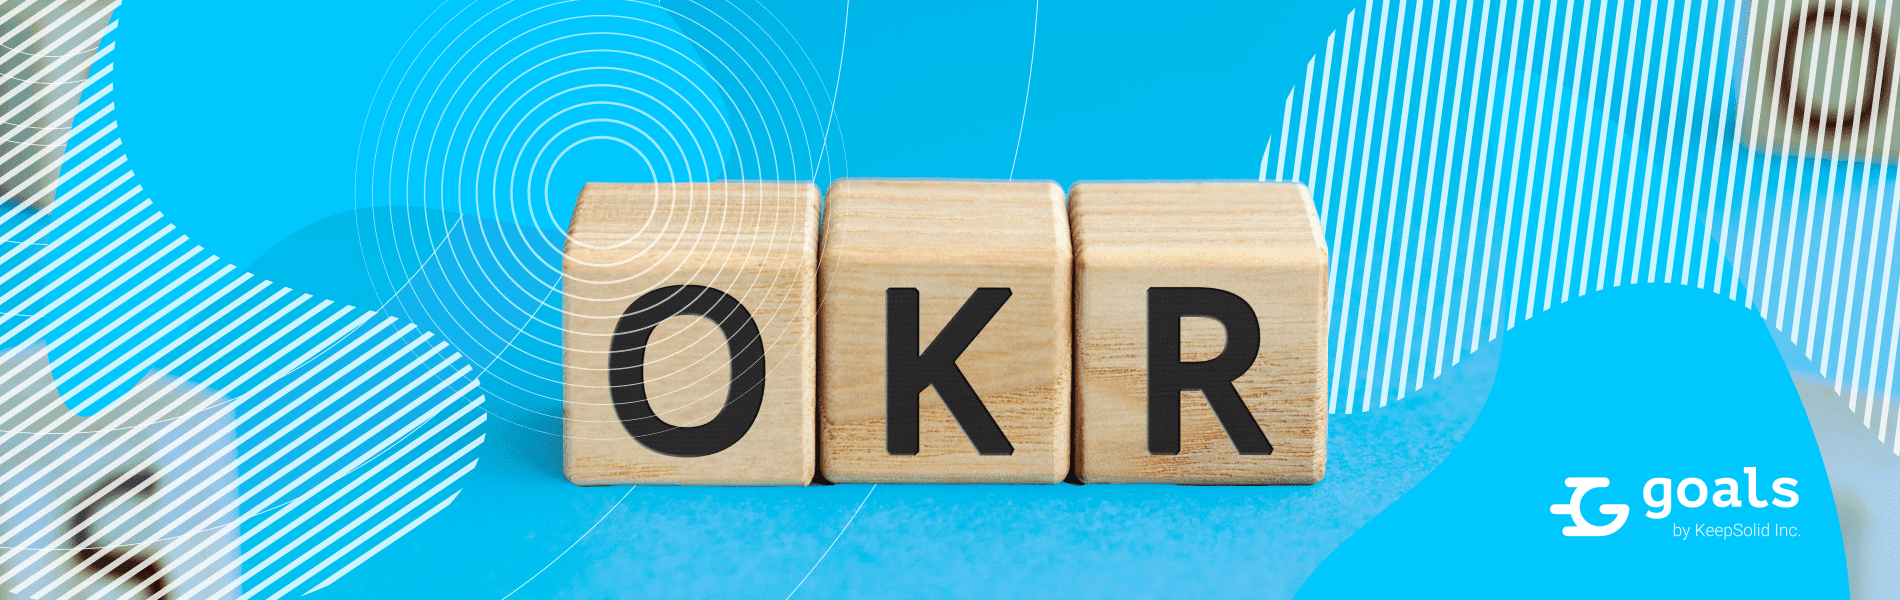 OKR - acronym for Objectives and Key Results